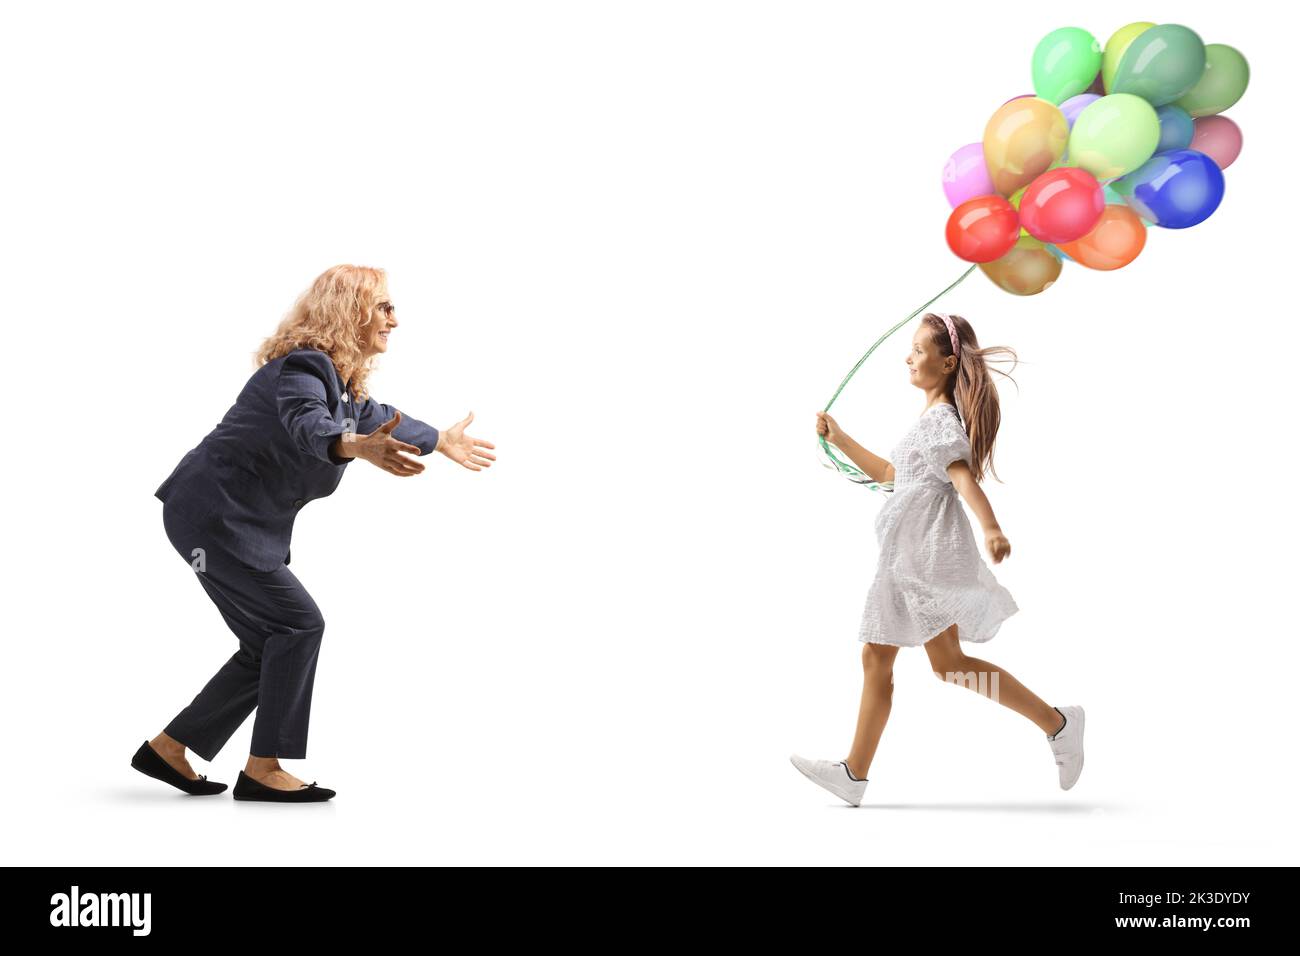 Mother waiting to hug her daughter running with balloons isolated on white background Stock Photo